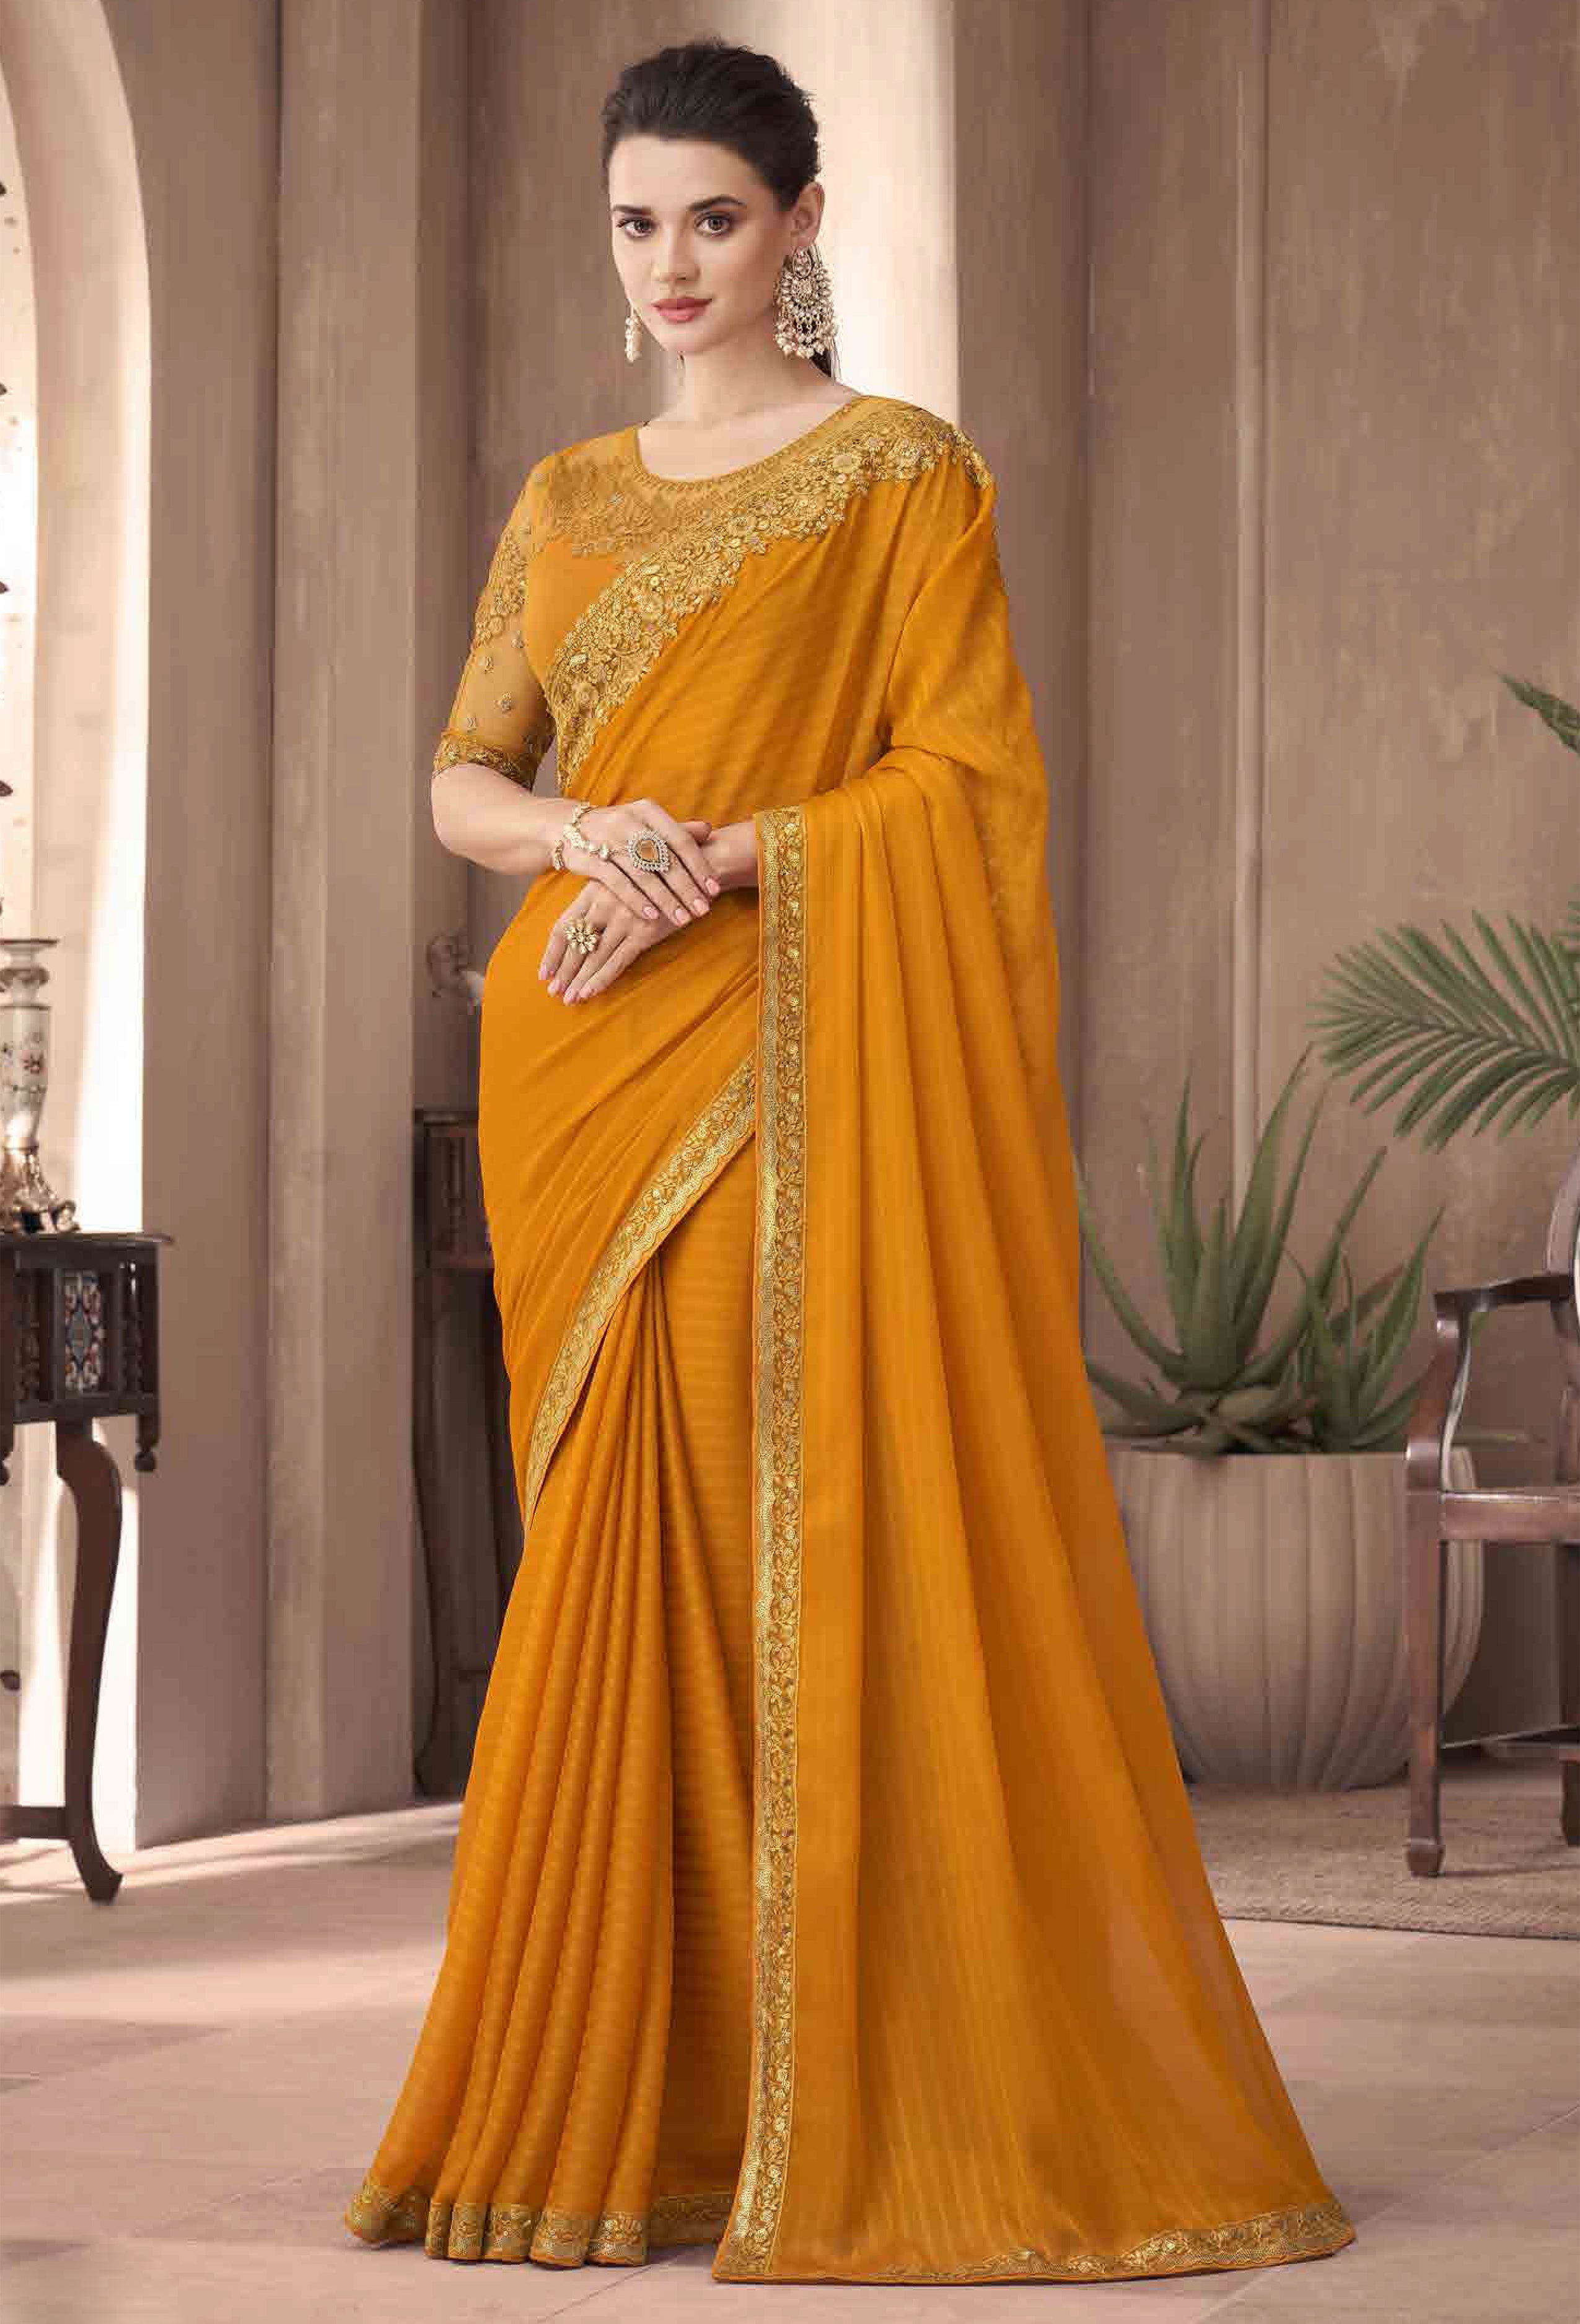 Stealworthy silk saree collection of Harisri​ | Times of India